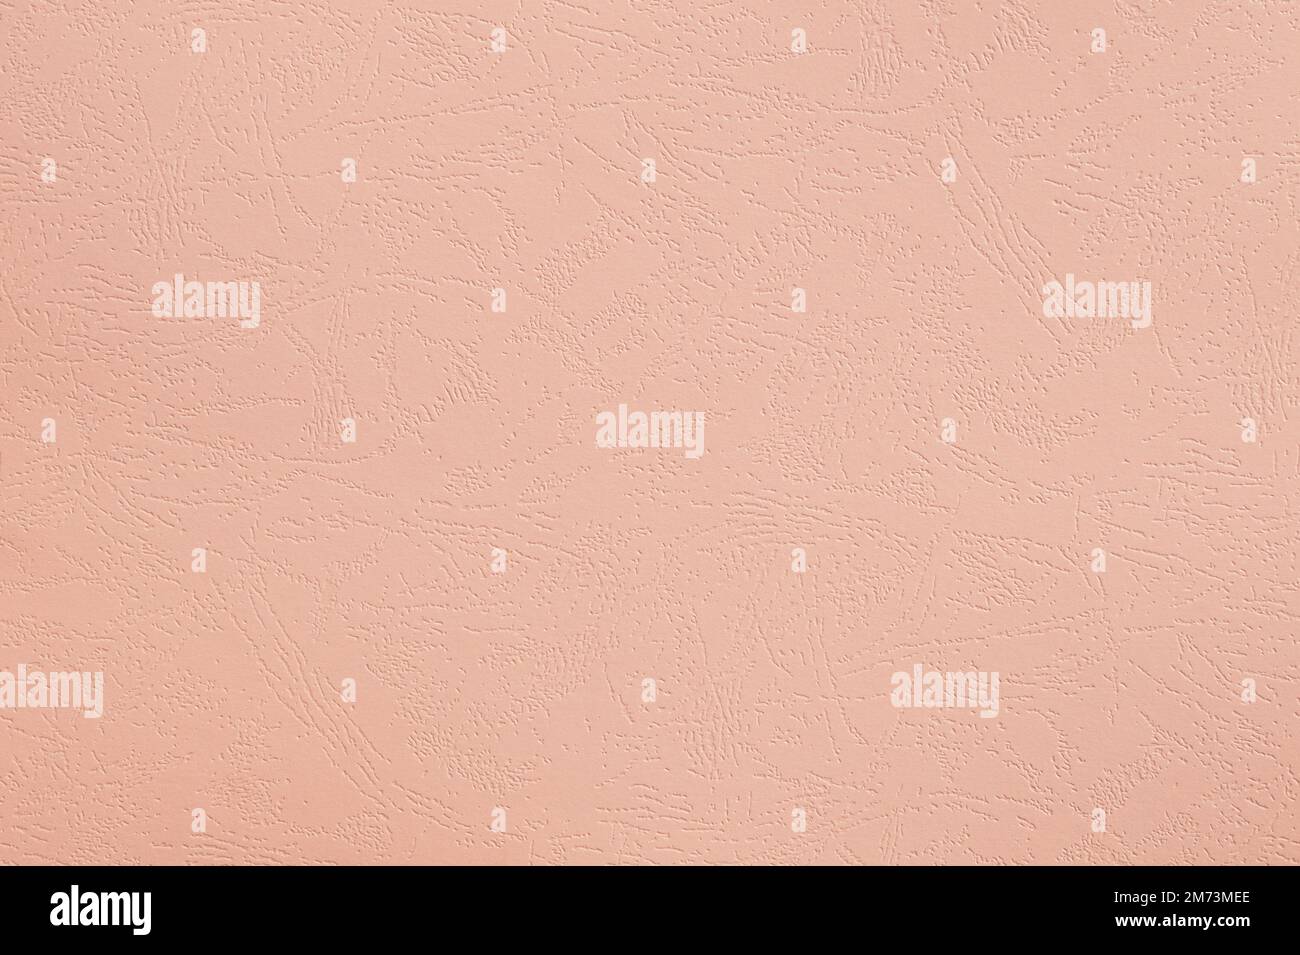 Closeup photo of cardboard sheet surface in beige peach neutral color. Unicolor textured background. Stock Photo